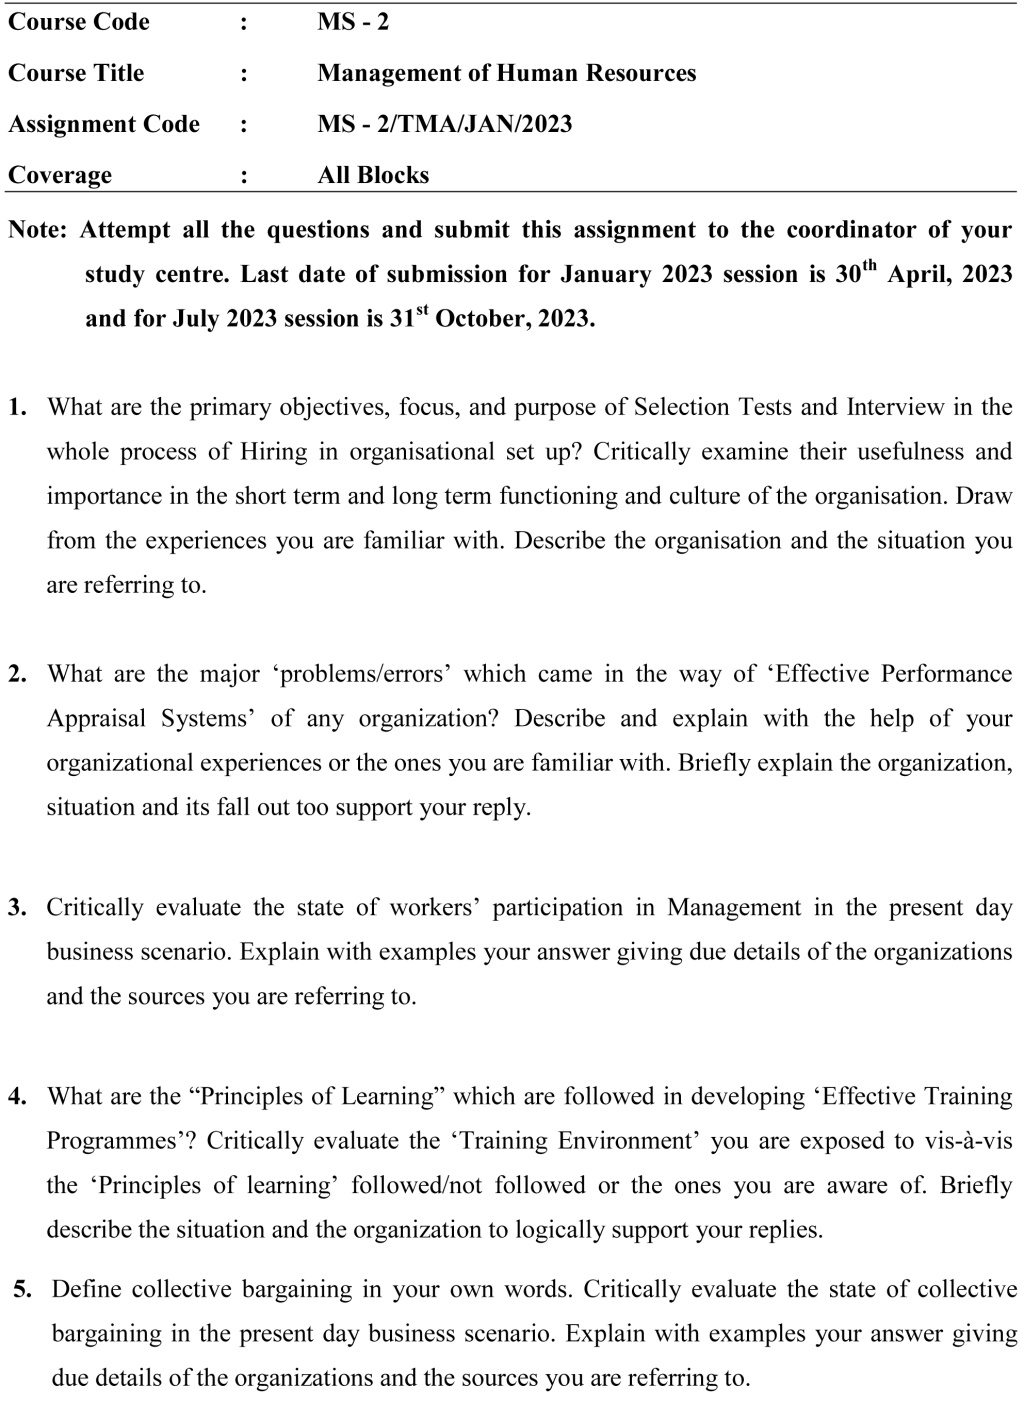 IGNOU MS-02 - Management of Human Resources Latest Solved Assignment -January 2023 - July 2023